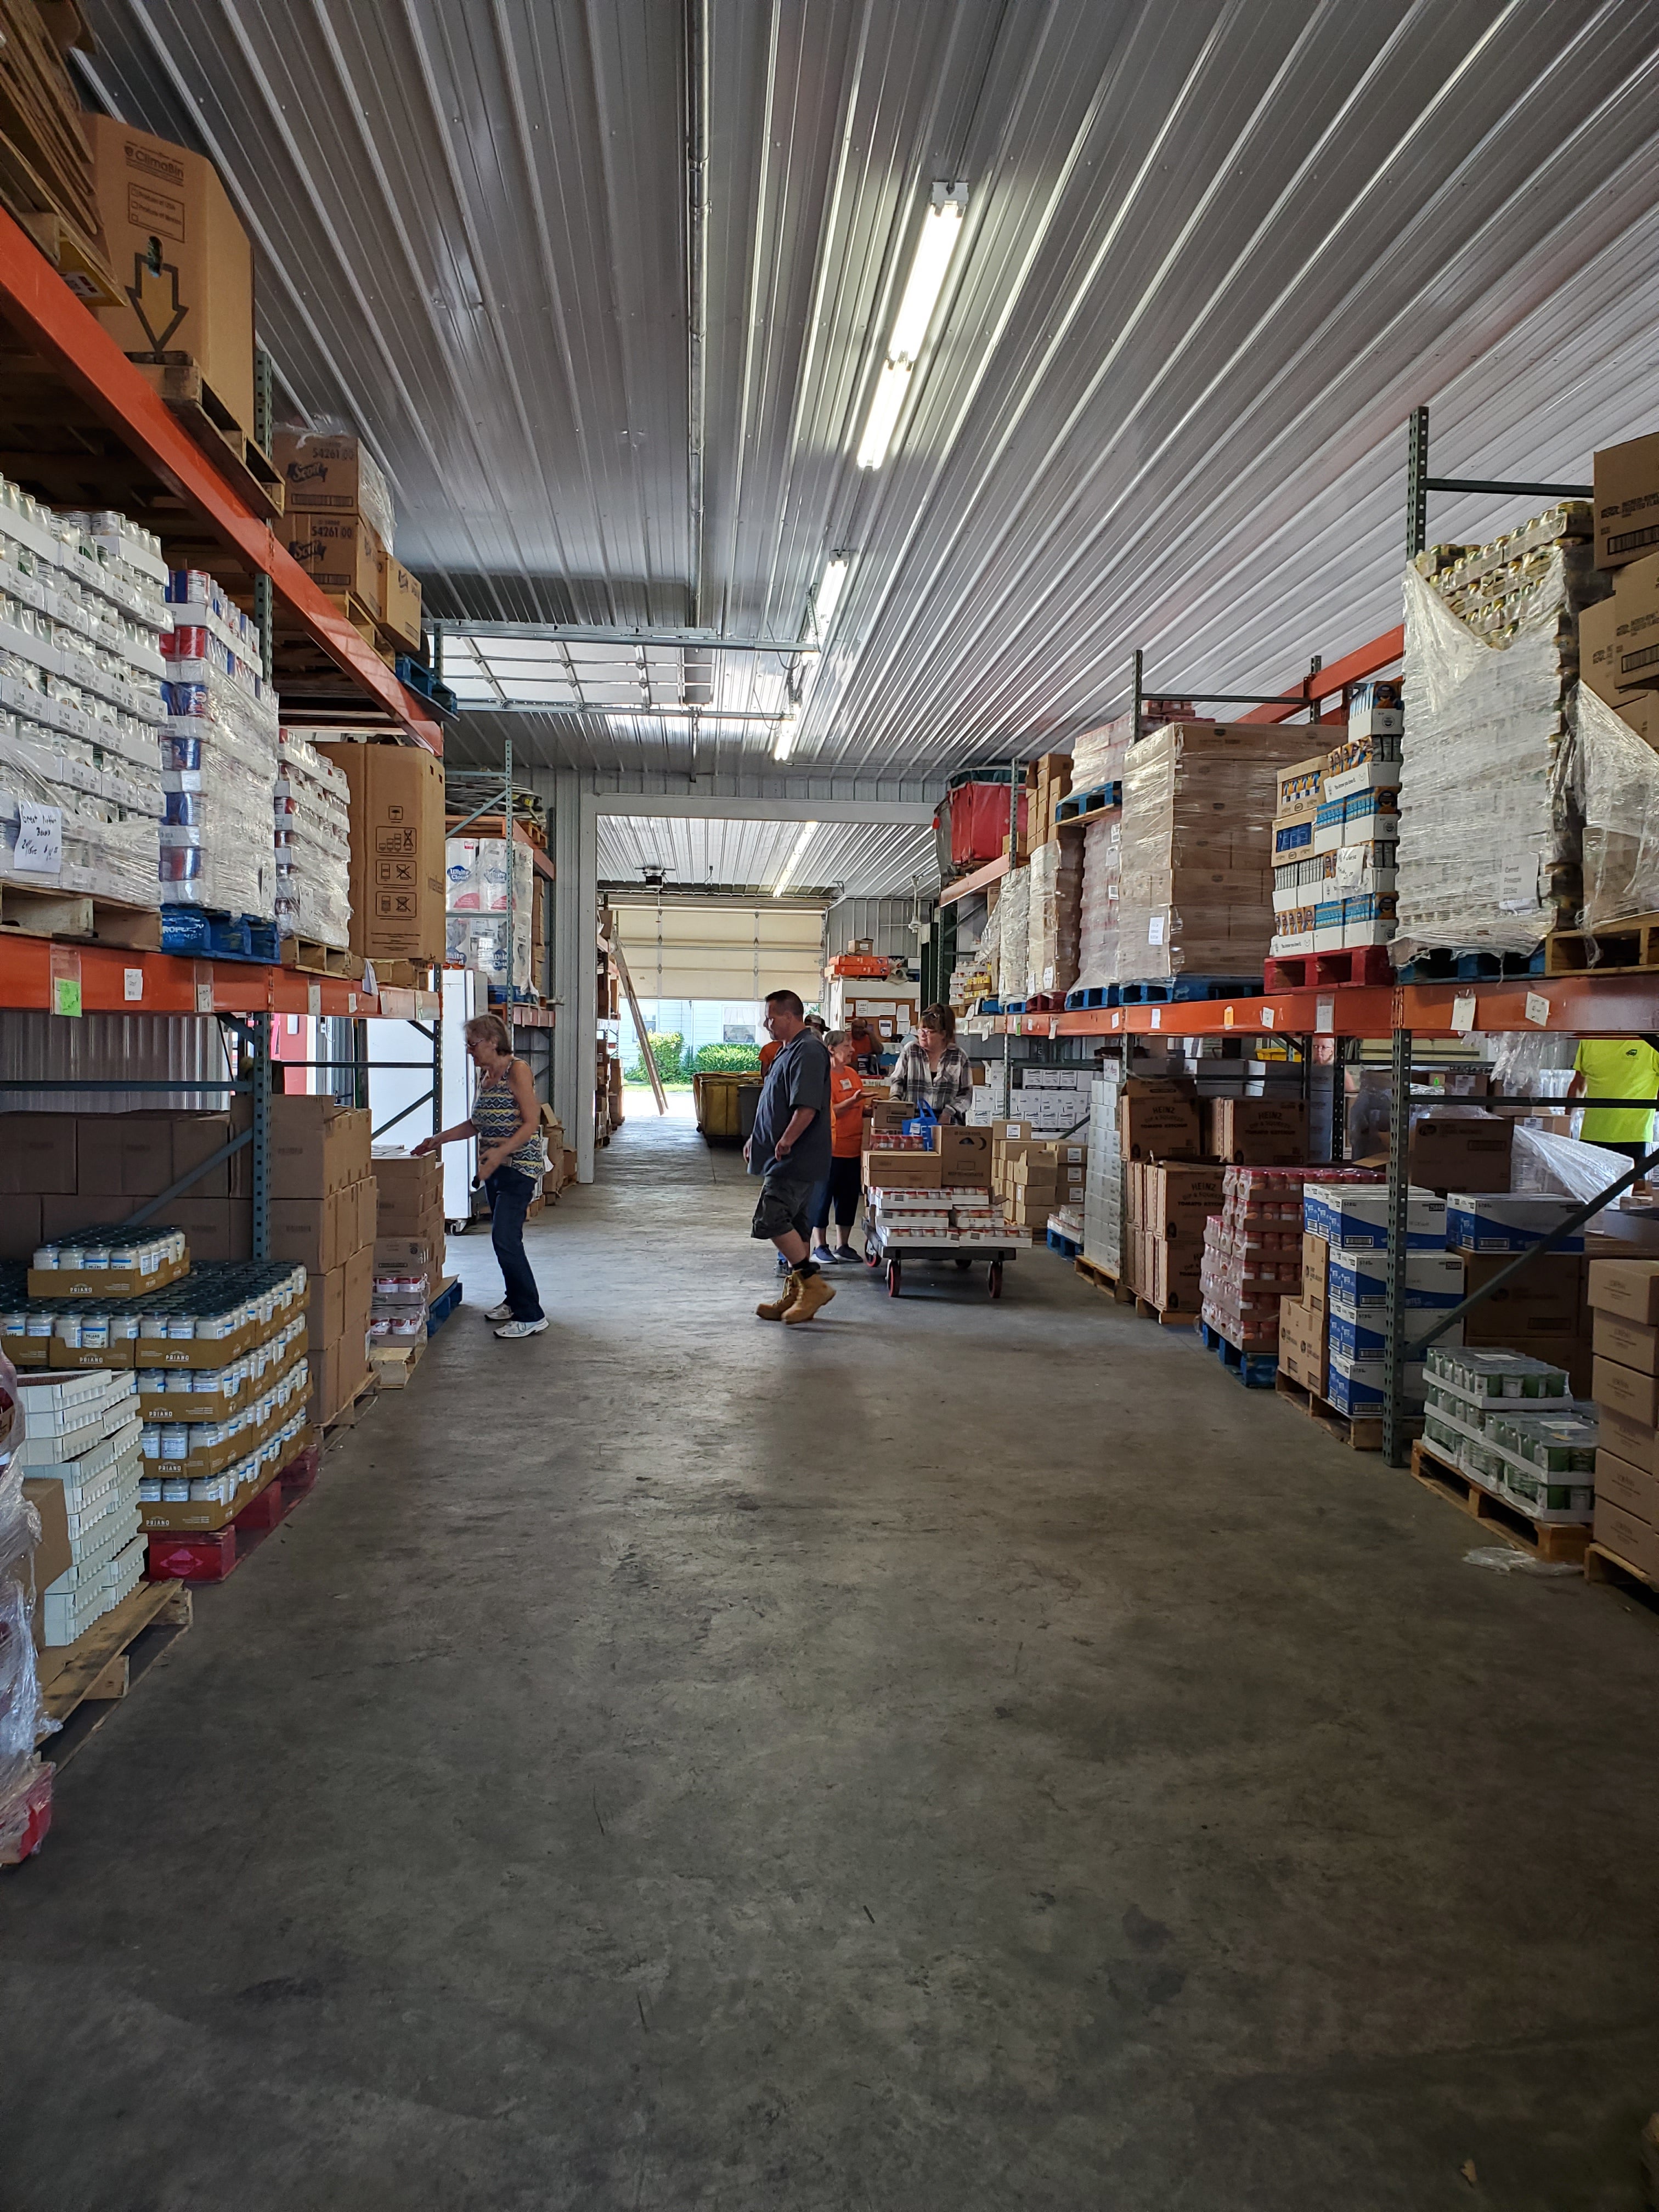 A view inside the Milford Food Bank warehouse